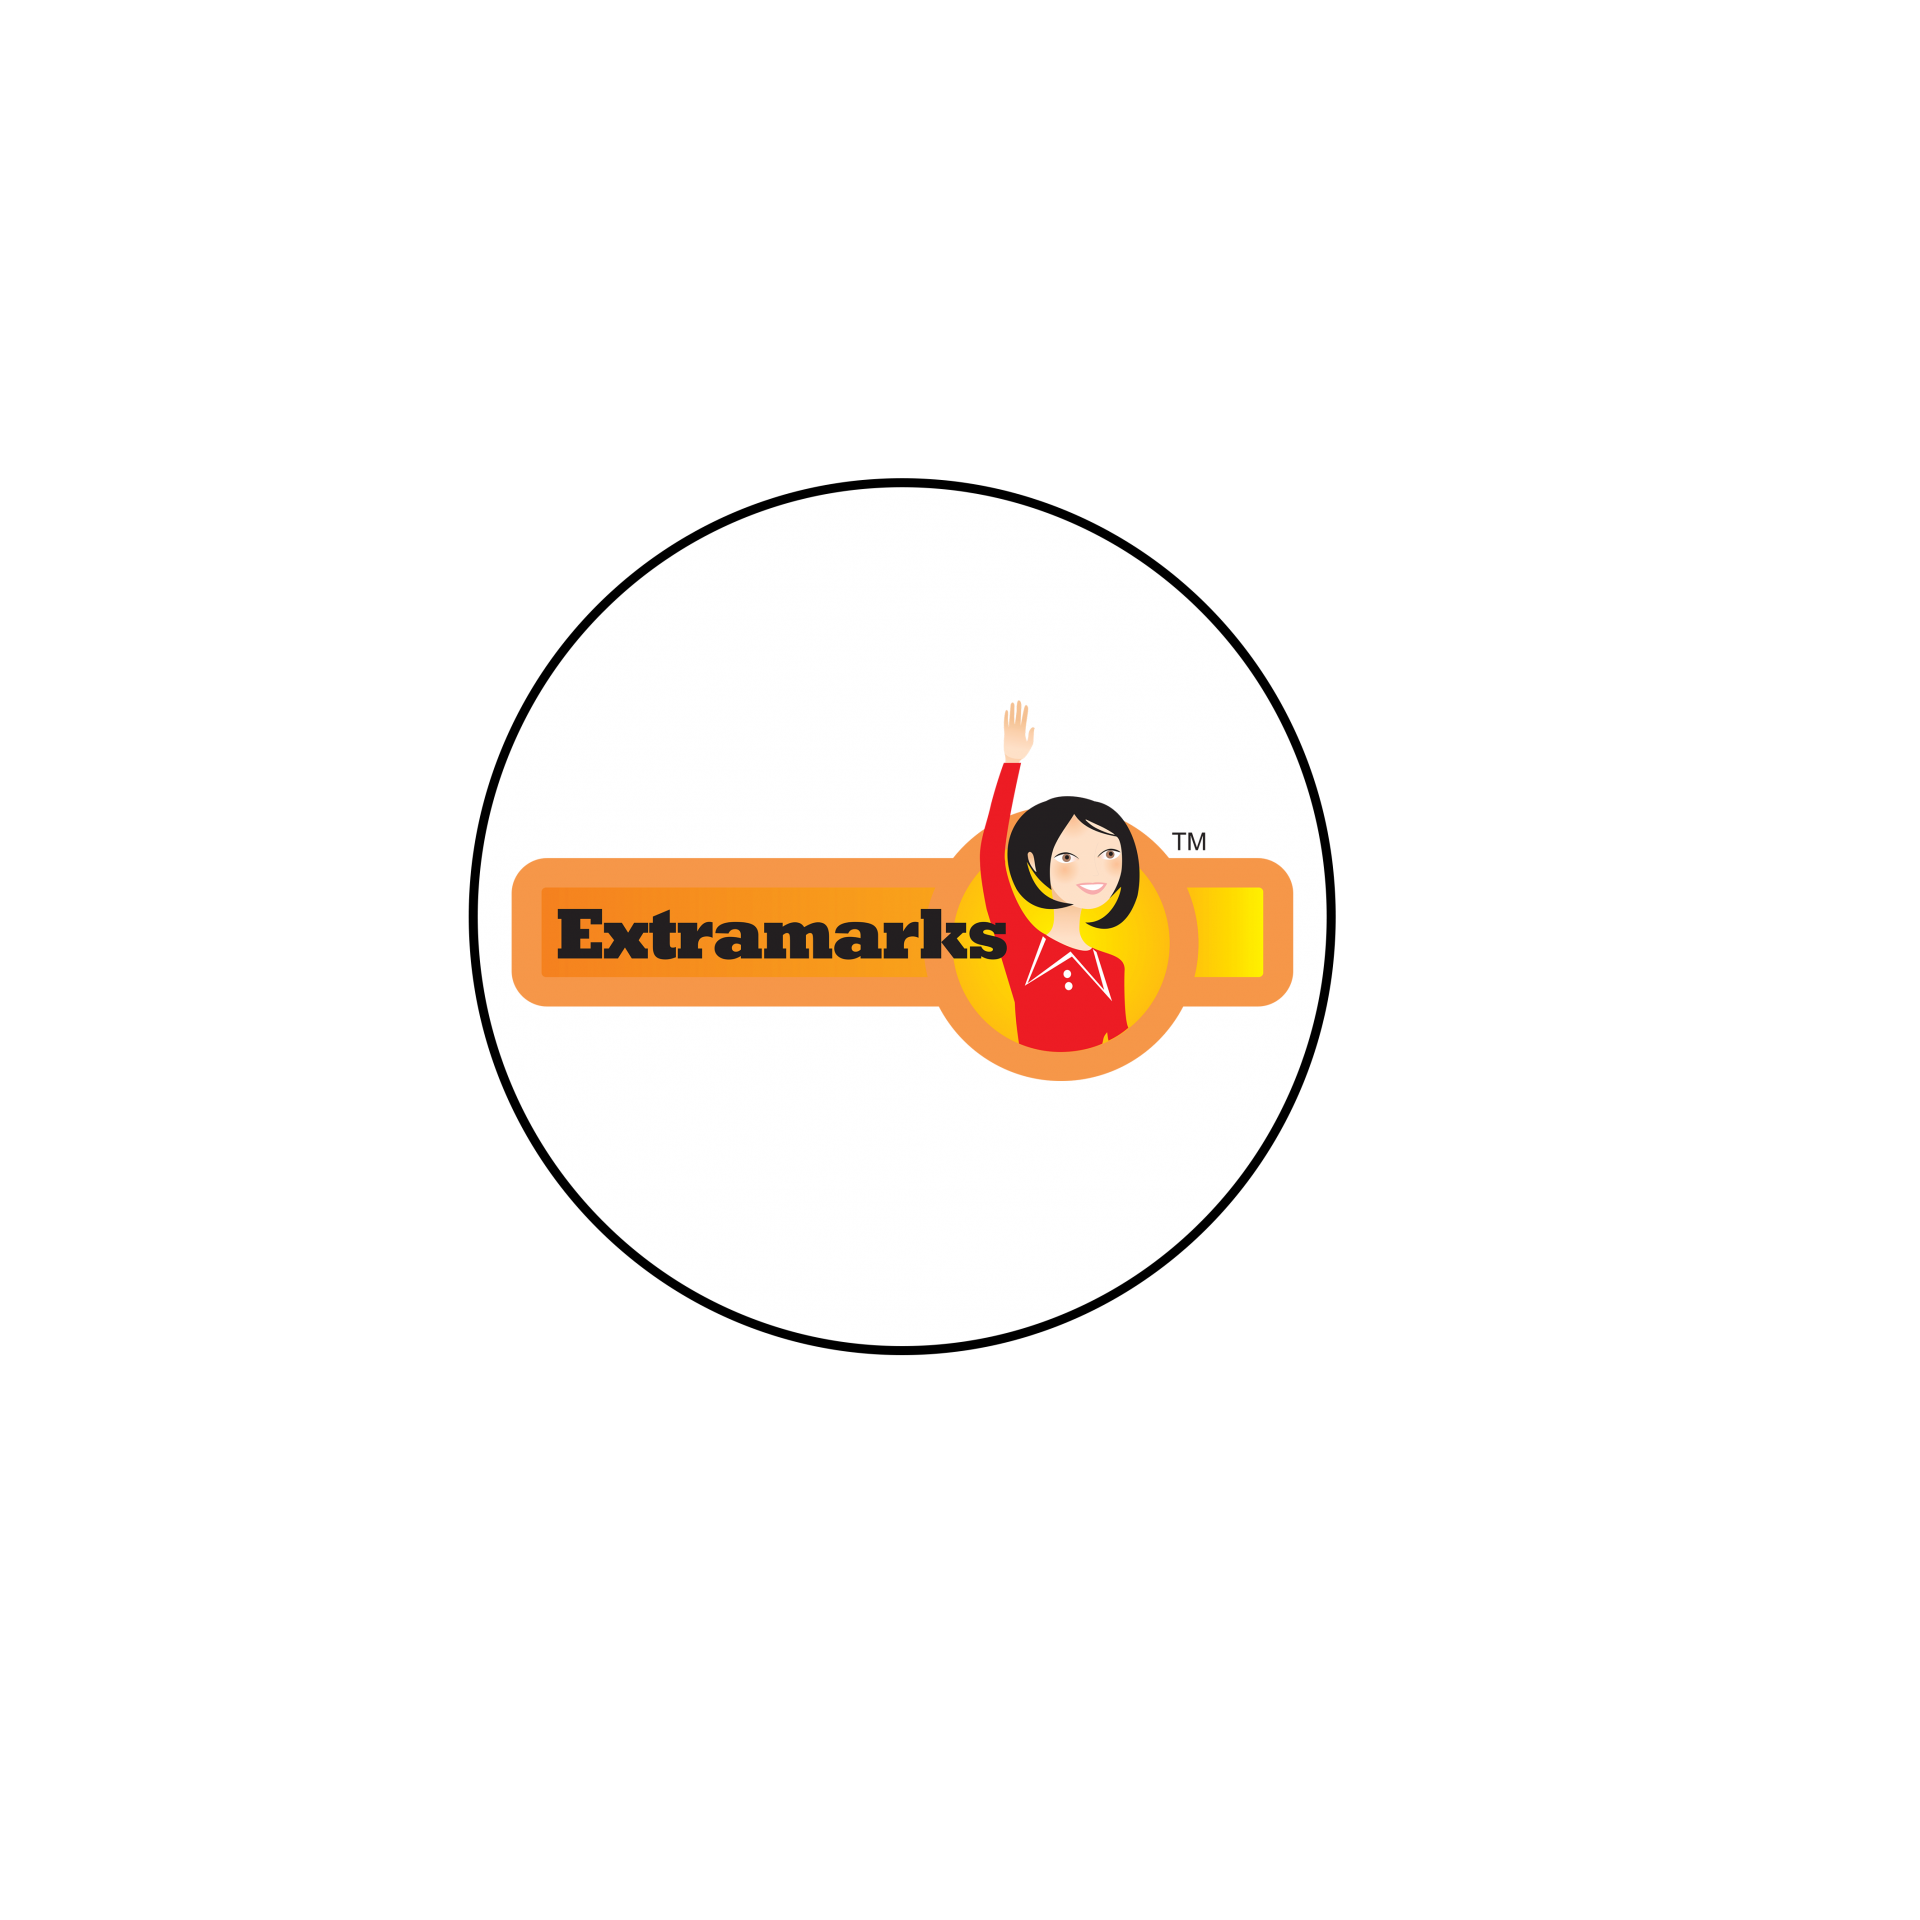 Sign Up For A Weekend Of Joyful Learning With Extramarks Weekender